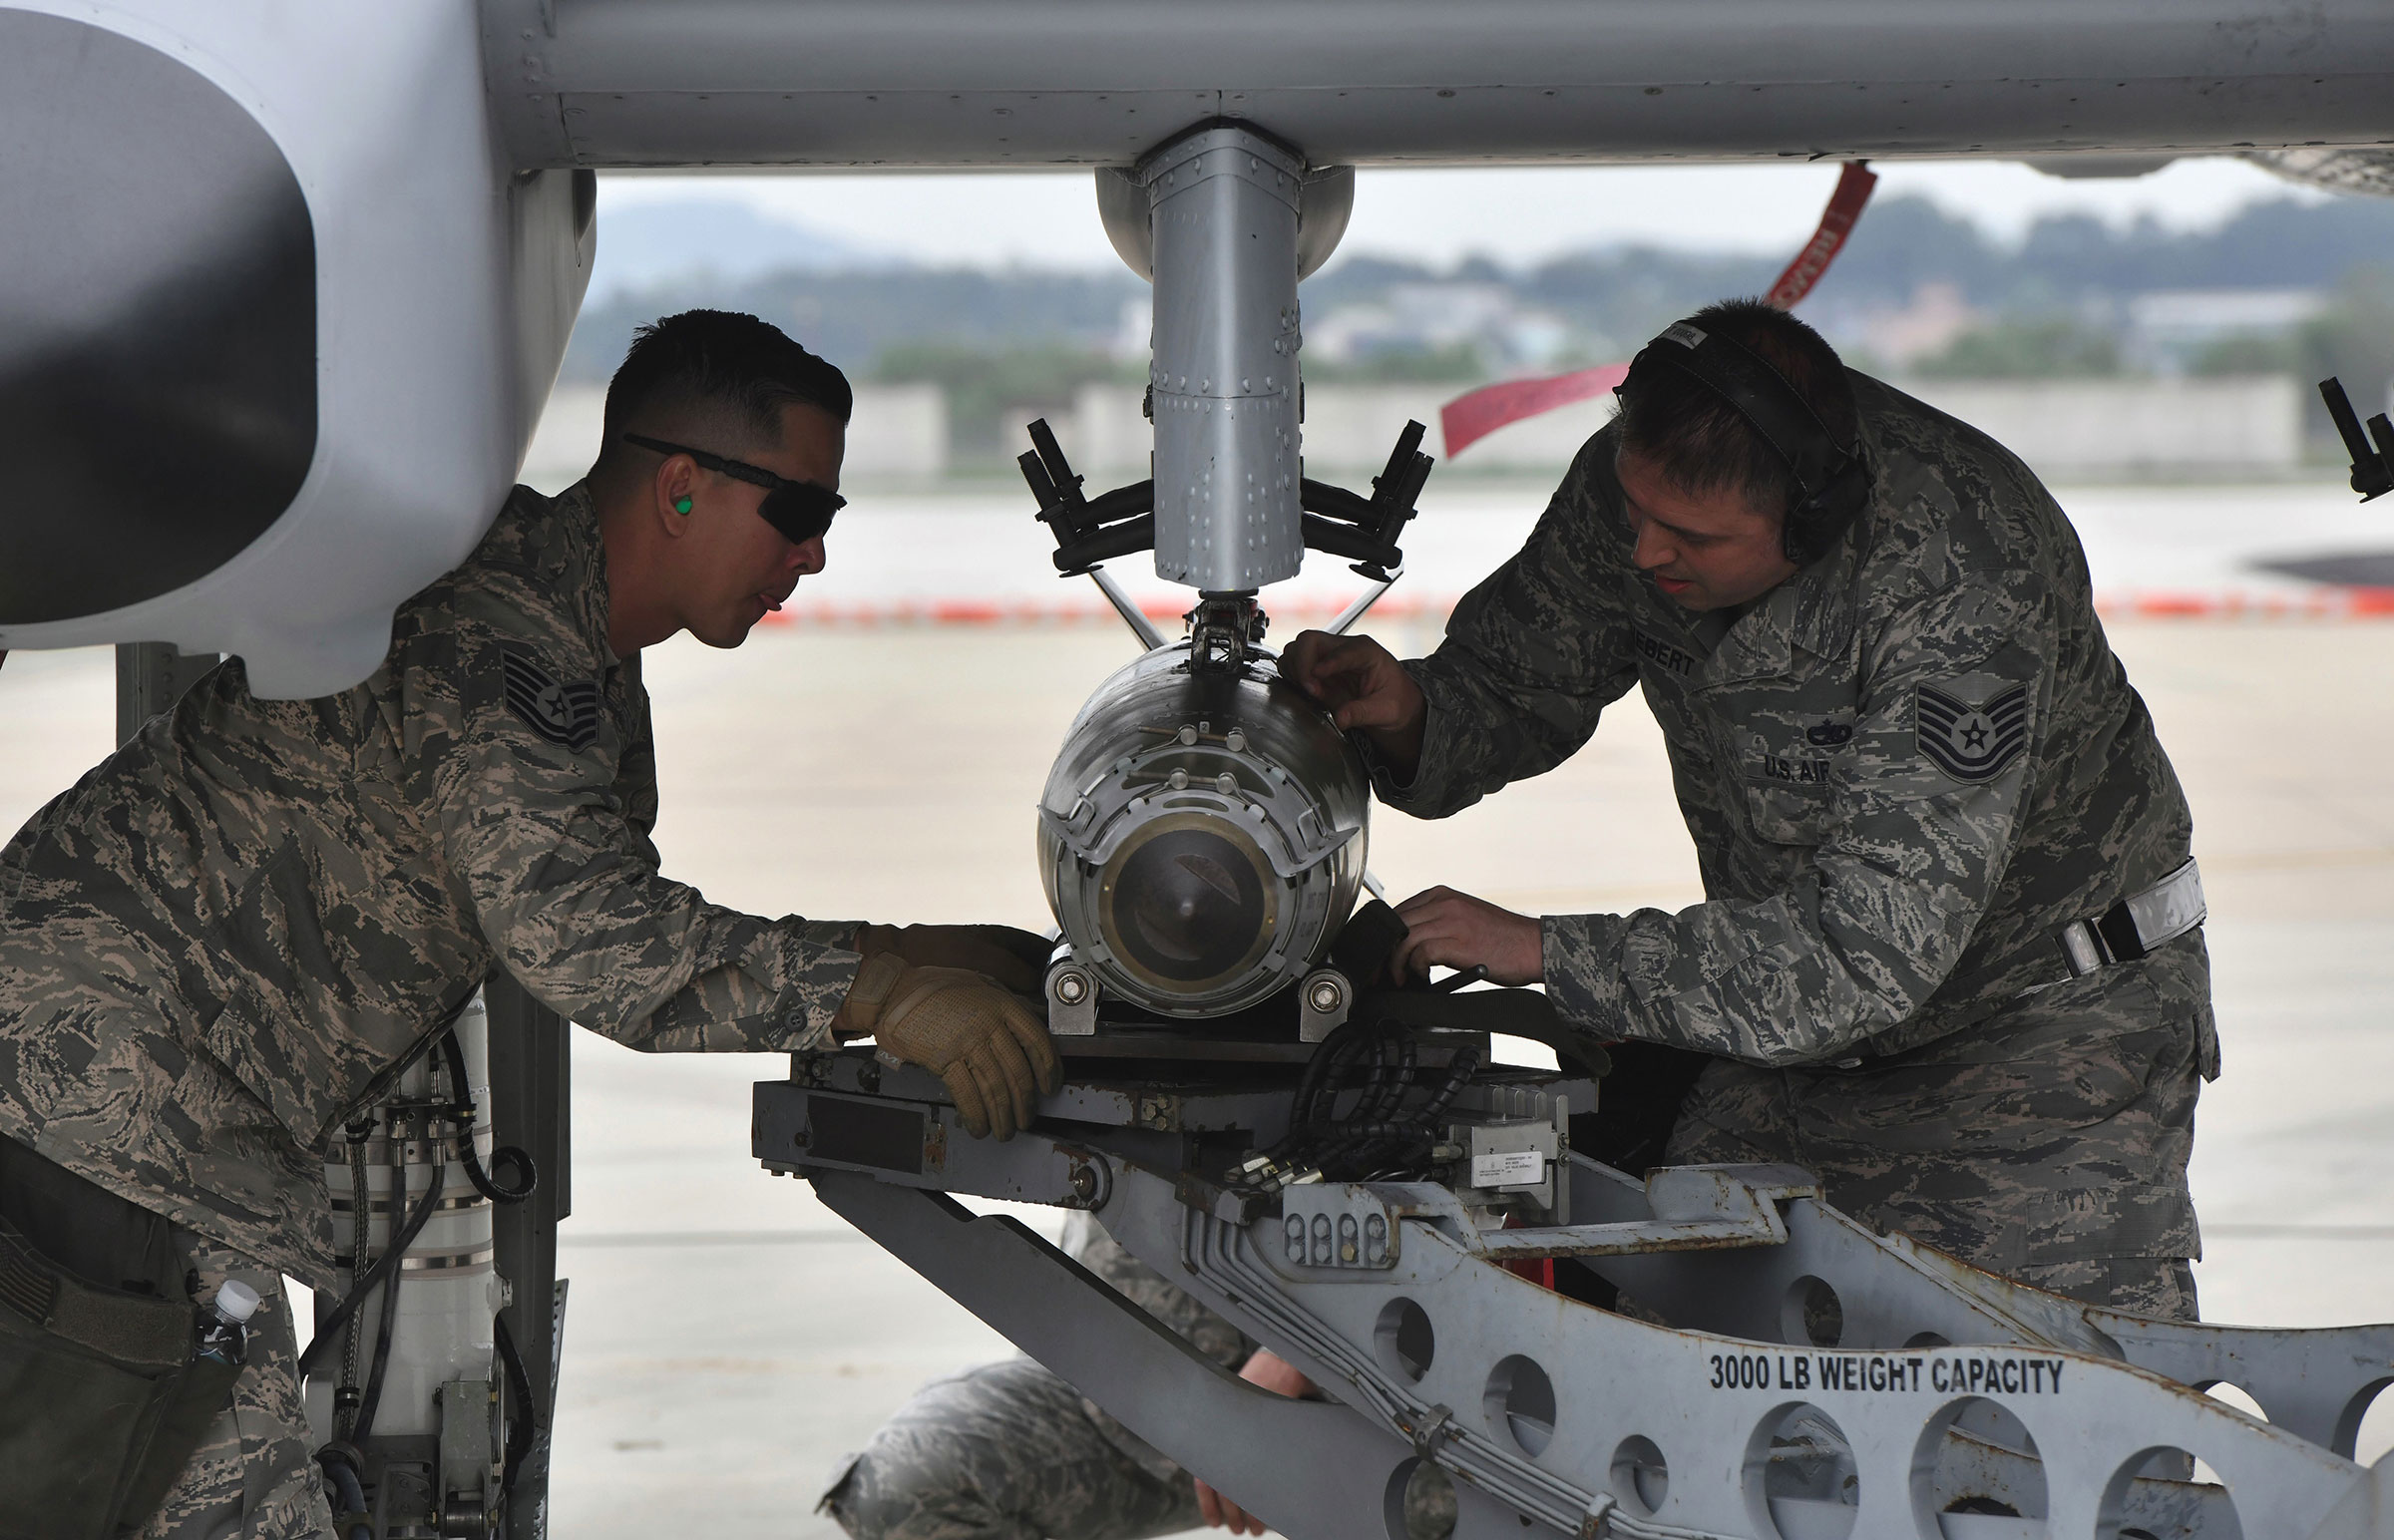 U.S. airmen inspect a bomb loaded onto an A-10 Thunderbolt II close air support aircraft during a demonstration during 